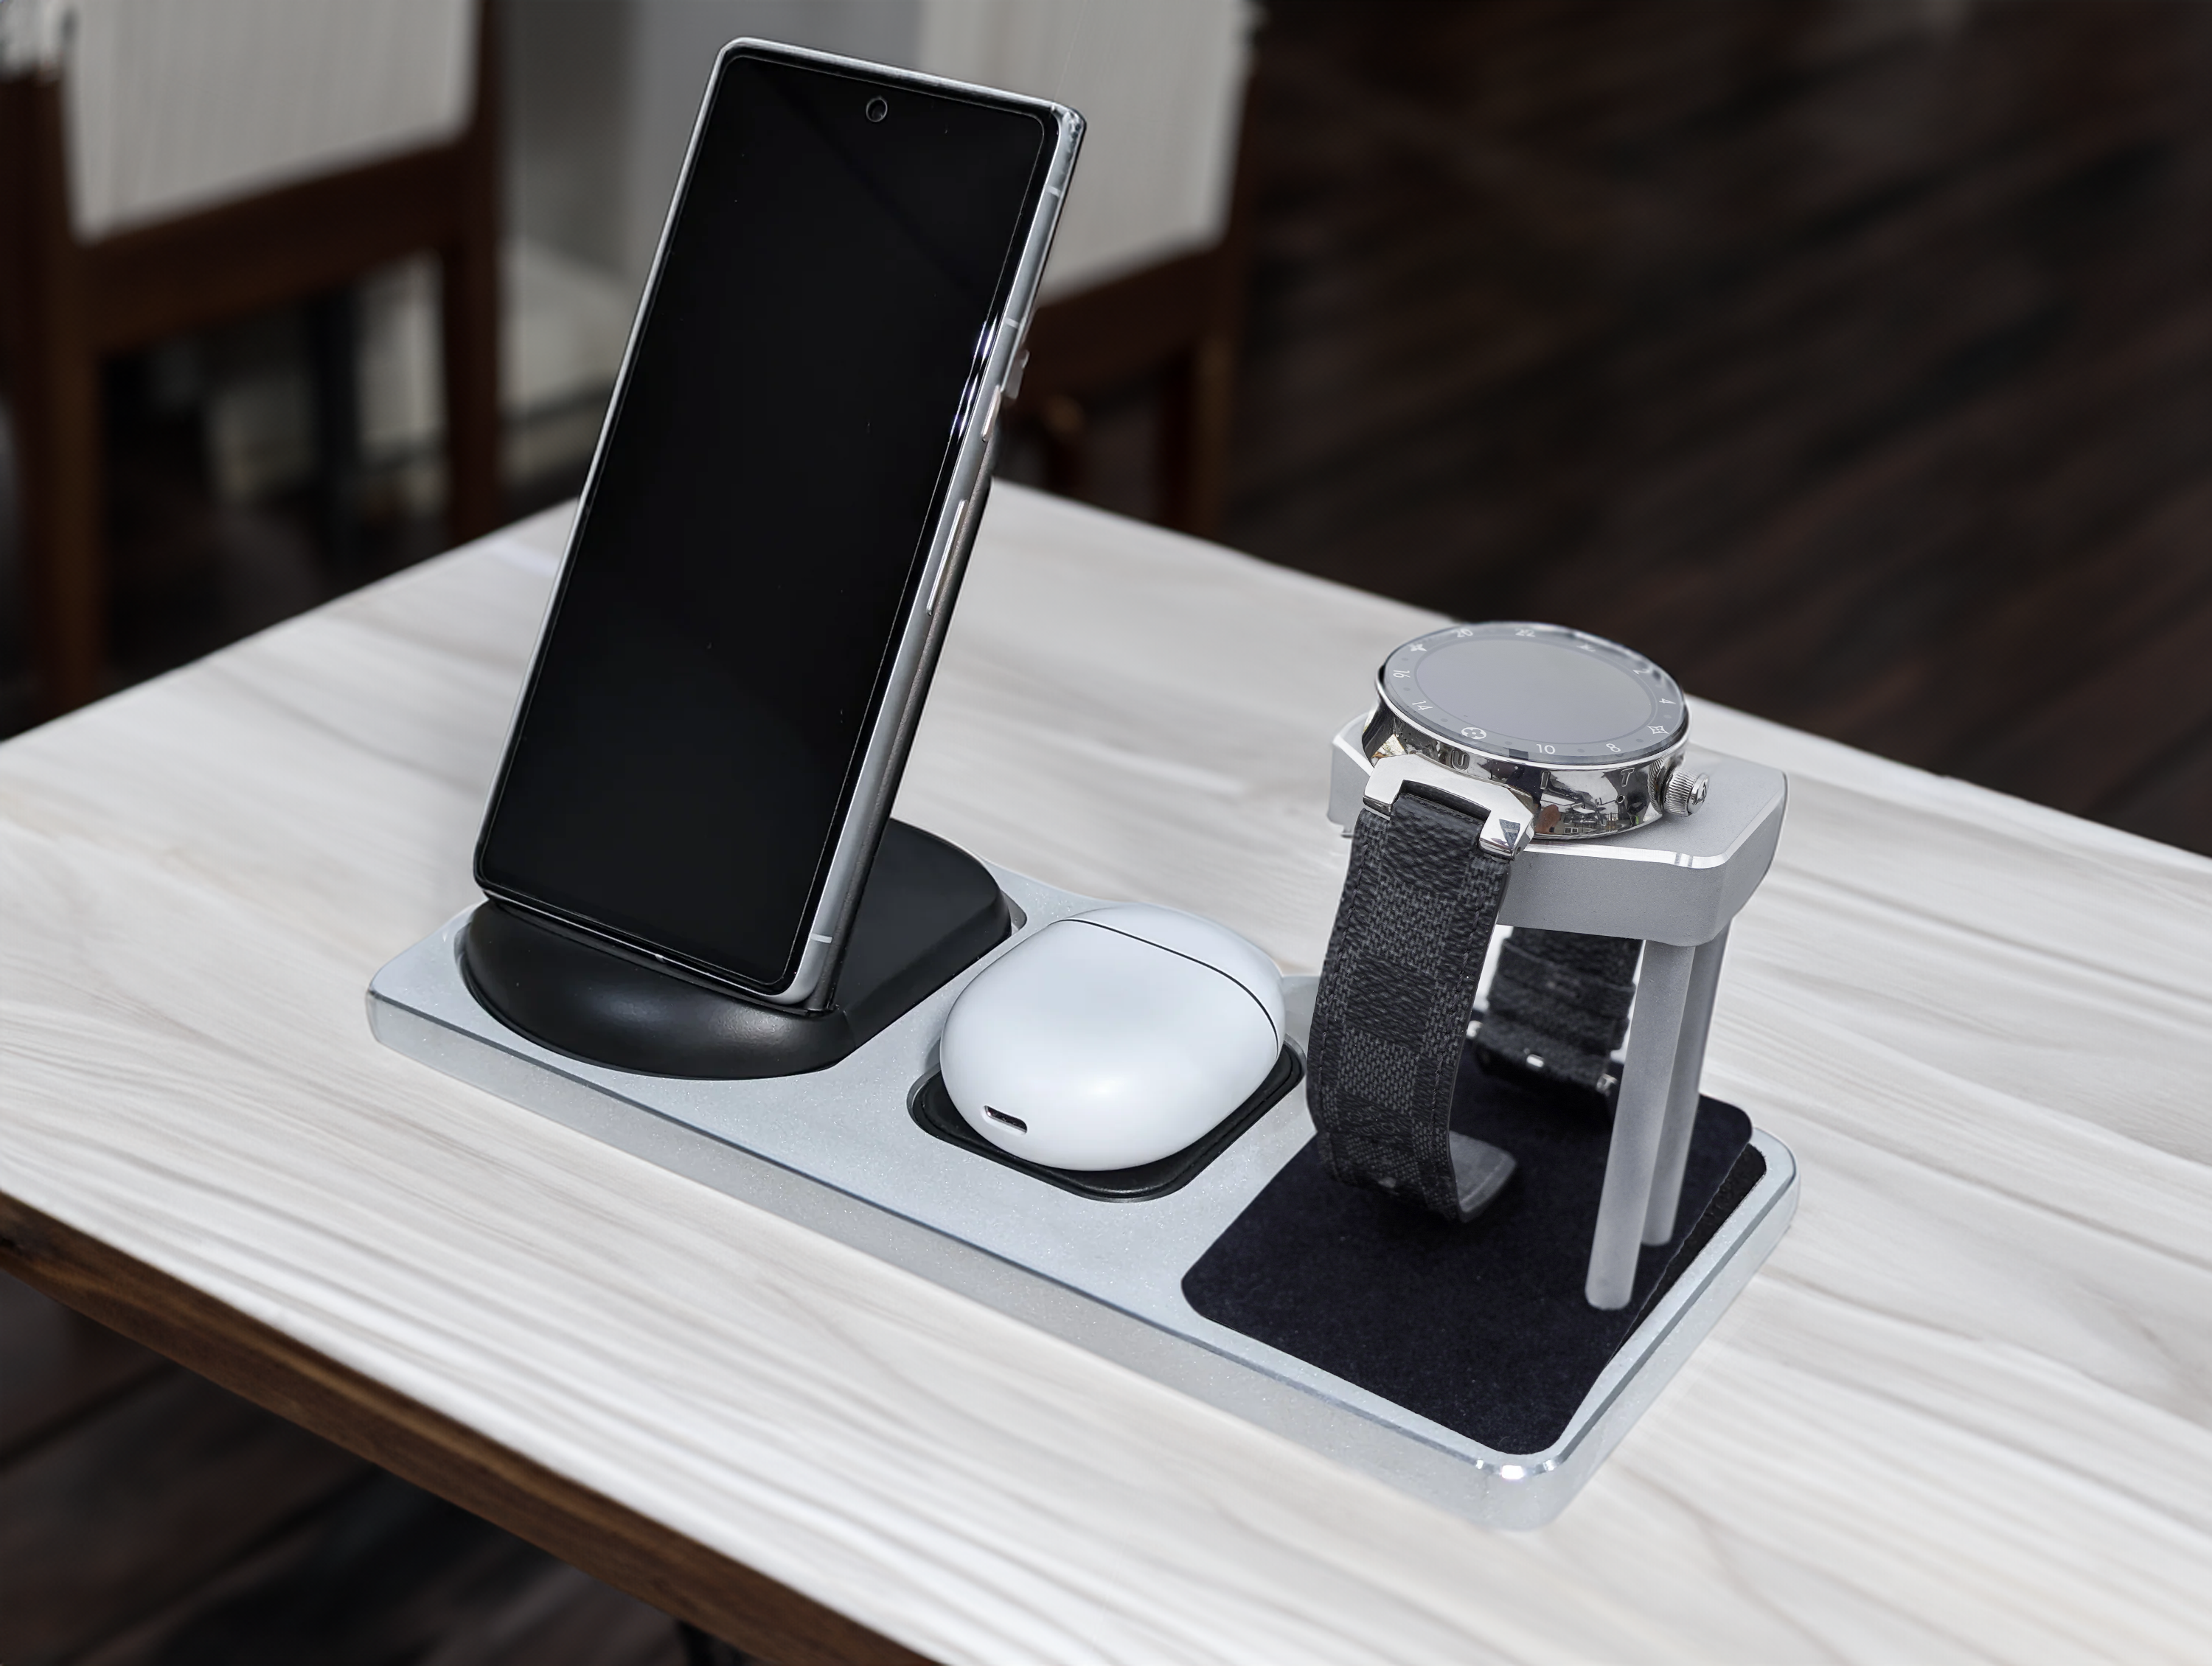 Louis Vuitton Tambour 1 and 2 Smartwatch Charging Stand